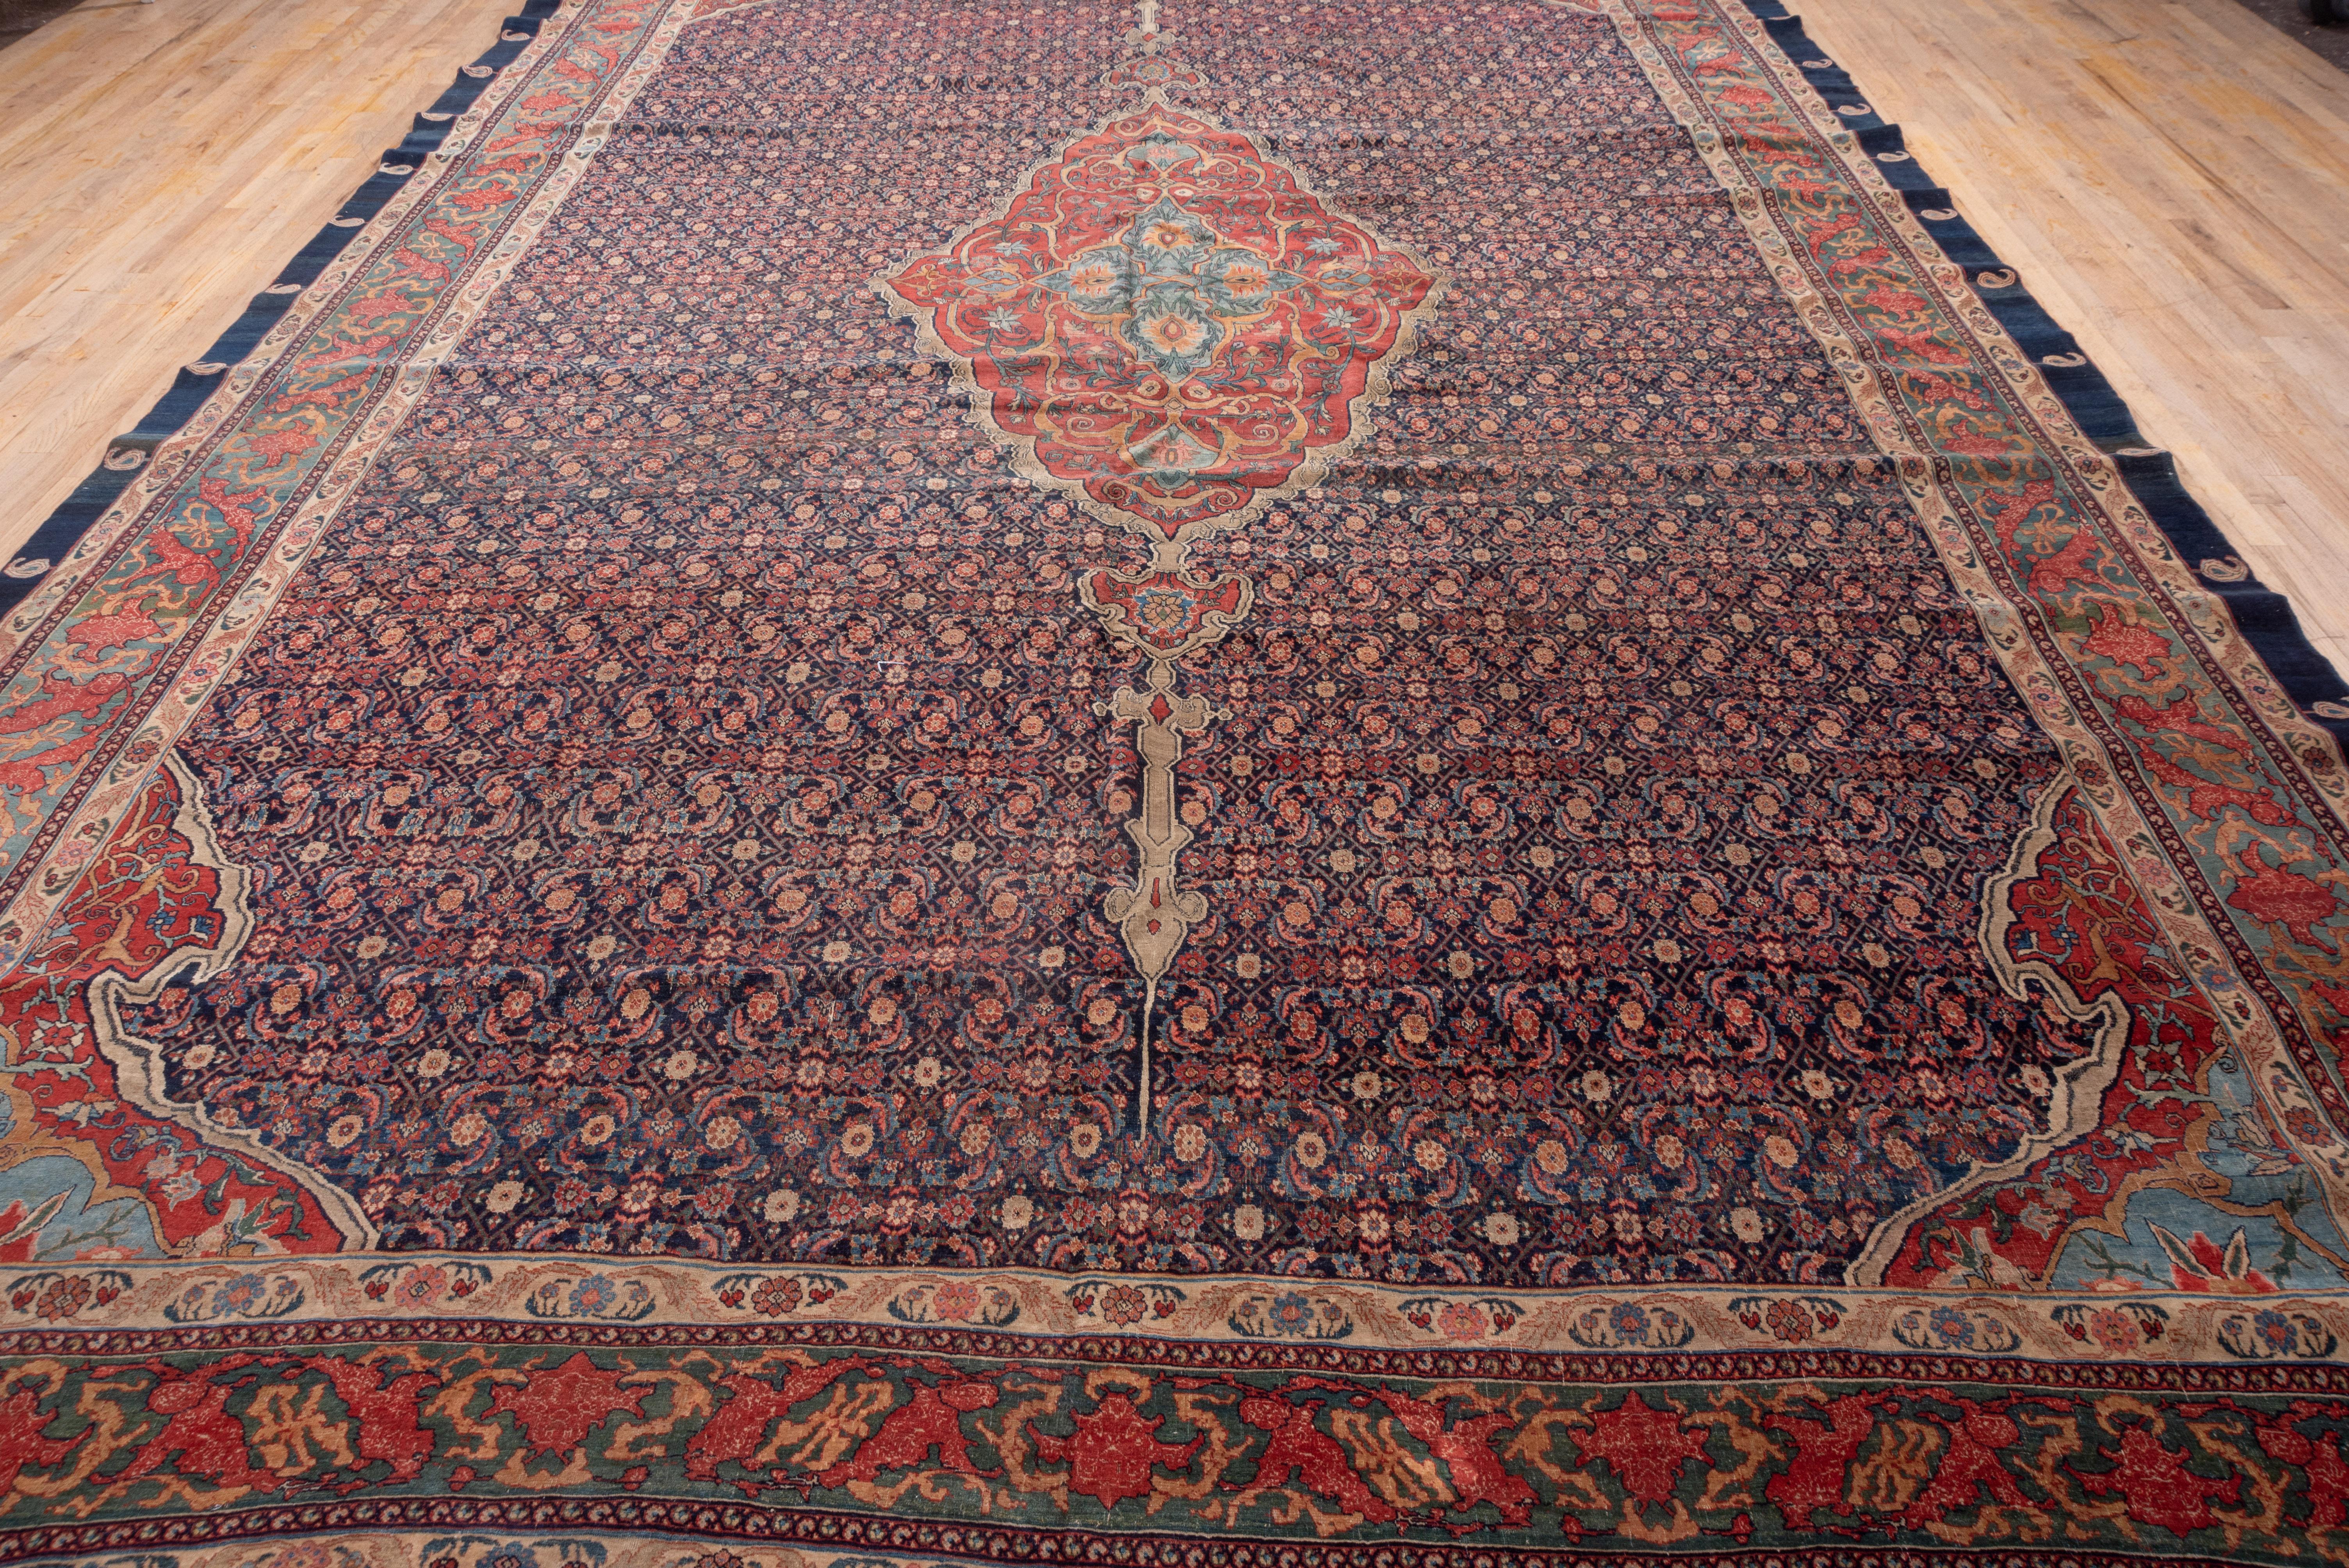 Hand-Knotted Fine Antique Bidjar Carpet with Incredible Colors and Details, Unusual Border For Sale